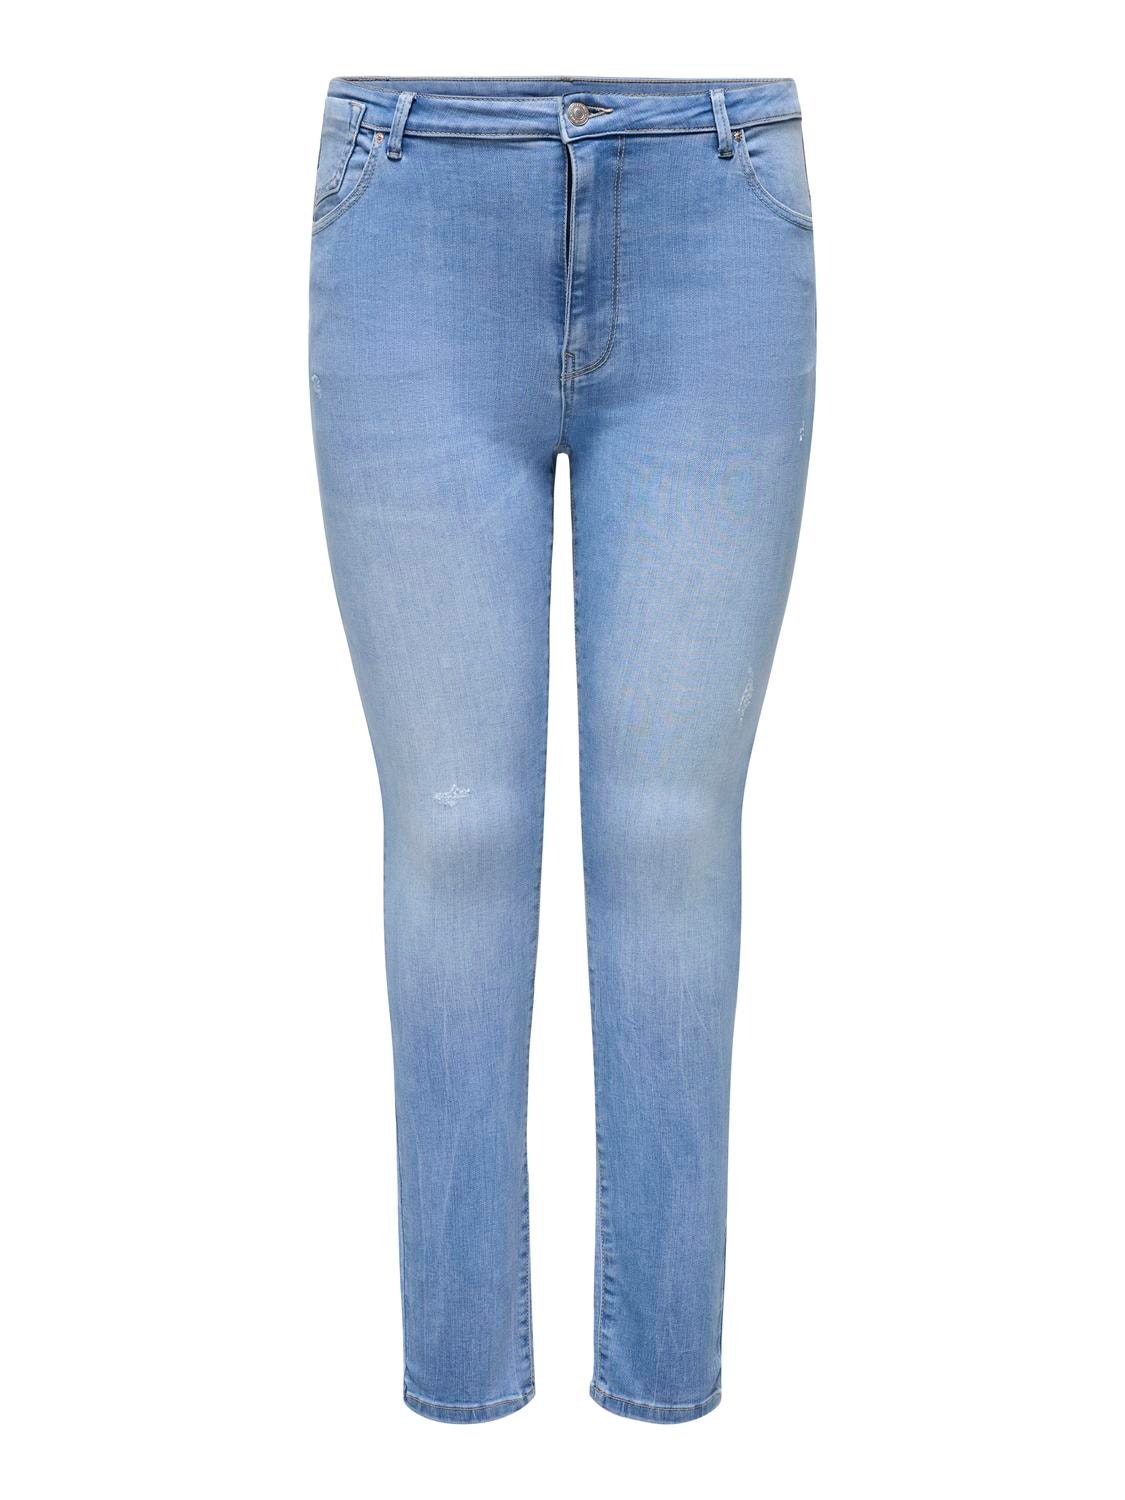 ONLY Skinny Fit Hohe Taille Jeans -Light Blue Denim - 15313912